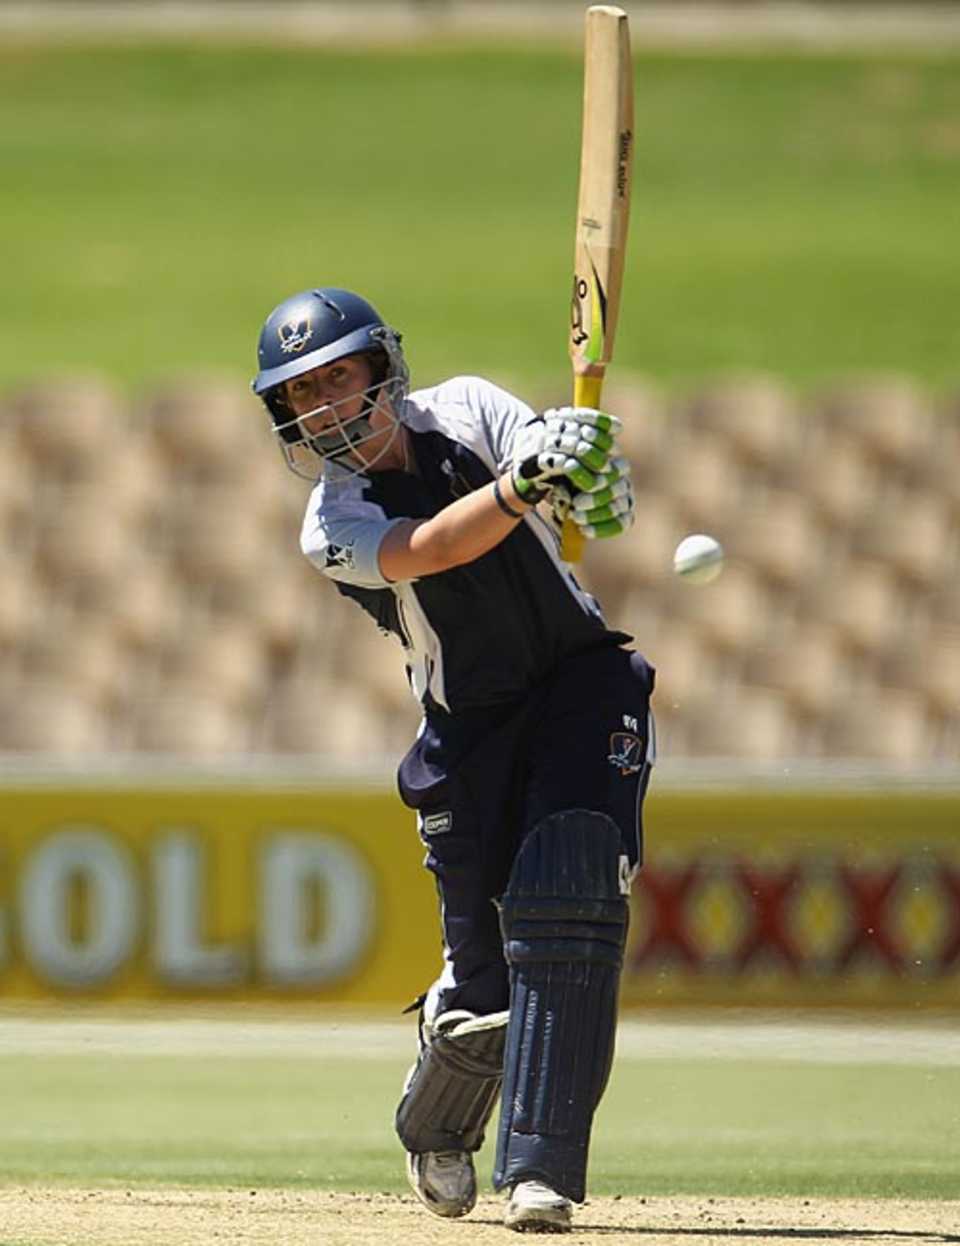 Elyse Villani drives during her innings of 29, New South Wales v Victoria, Women's Twenty20 final, Adelaide, January 23, 2009